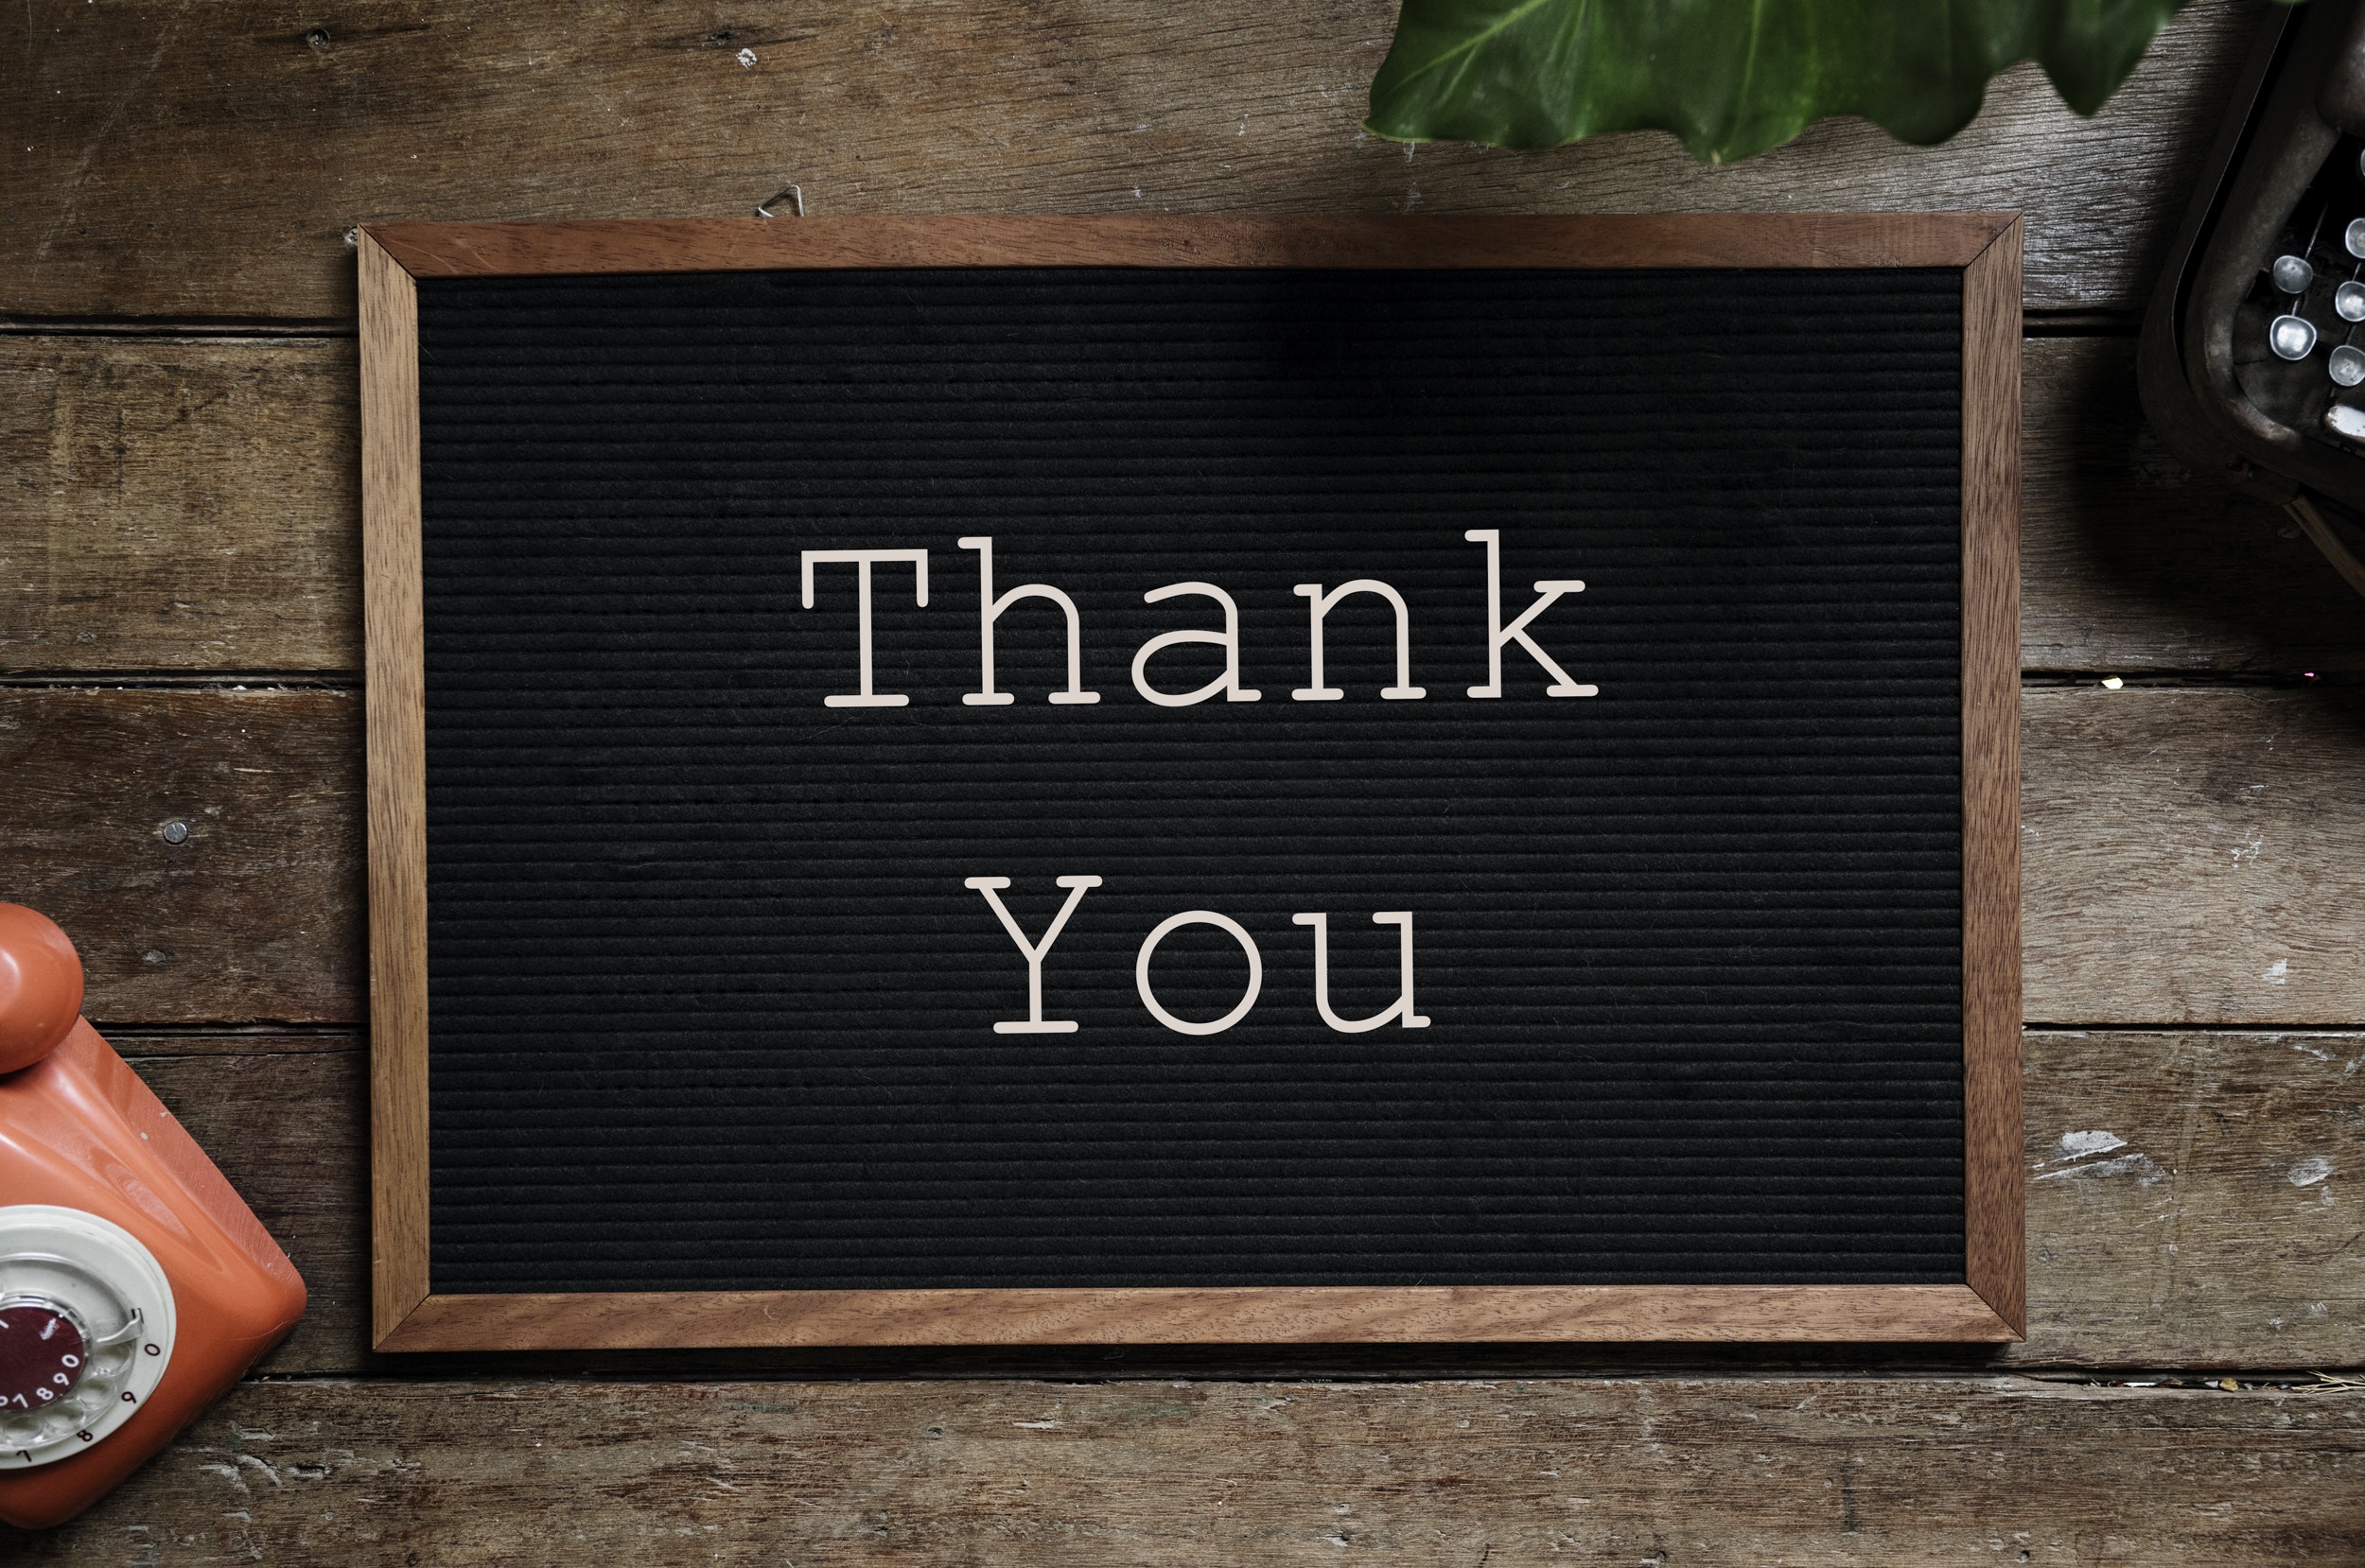 The importance of saying ‘thank you’